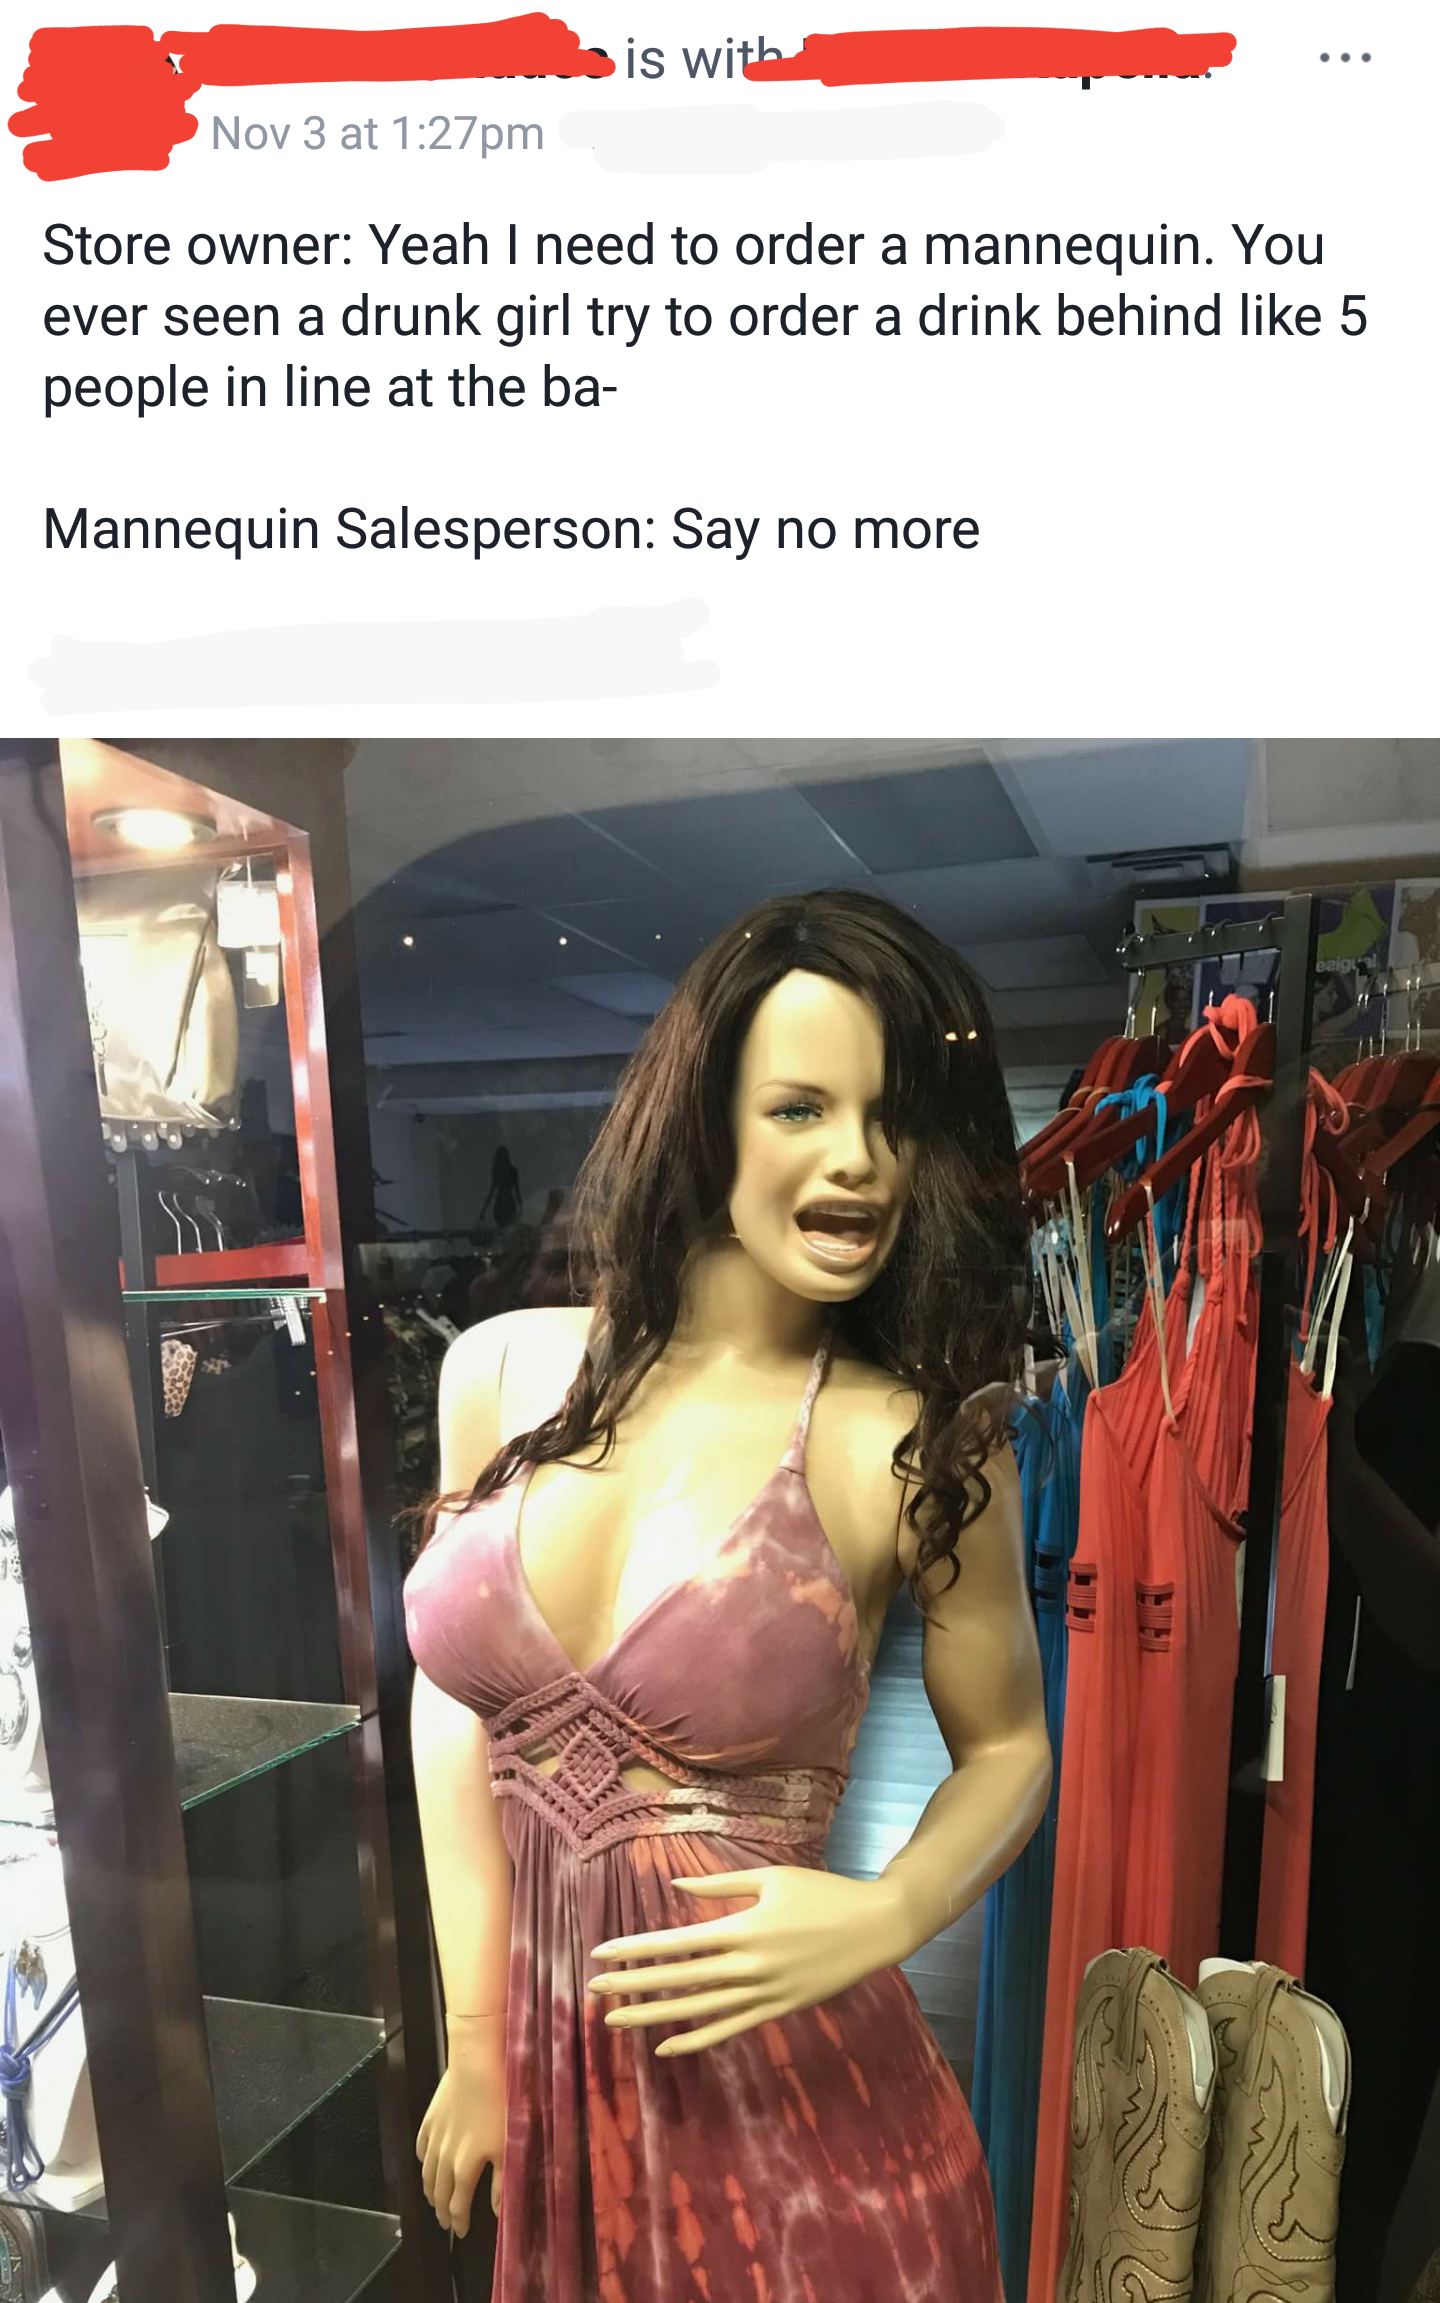 mannequin meme - is with Nov 3 at pm Store owner Yeah I need to order a mannequin. You ever seen a drunk girl try to order a drink behind 5 people in line at the ba Mannequin Salesperson Say no more